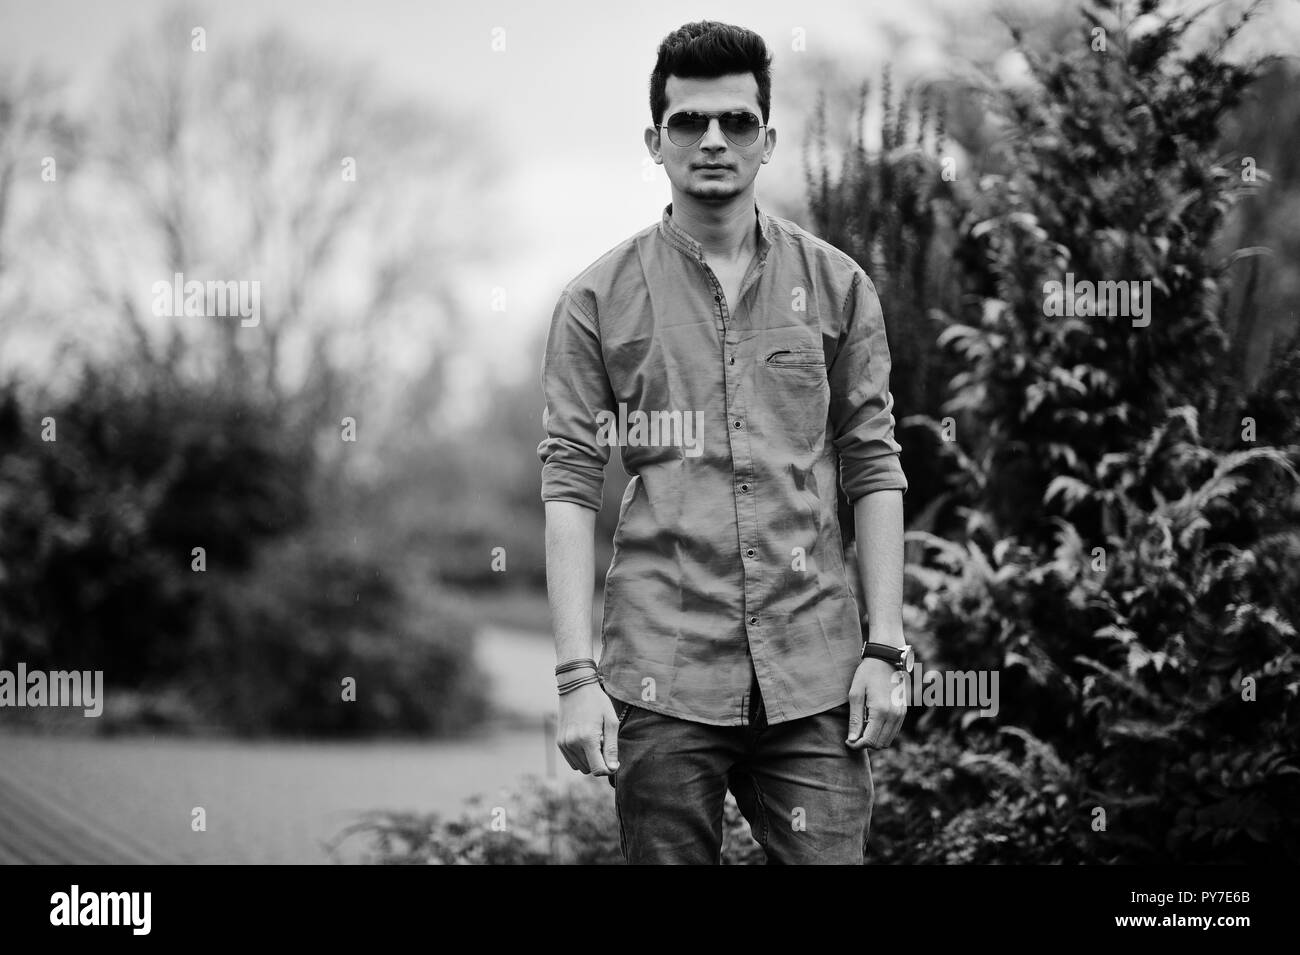 Indian man at red shirt and sunglasses posed outdoor. Black and white photo. Stock Photo